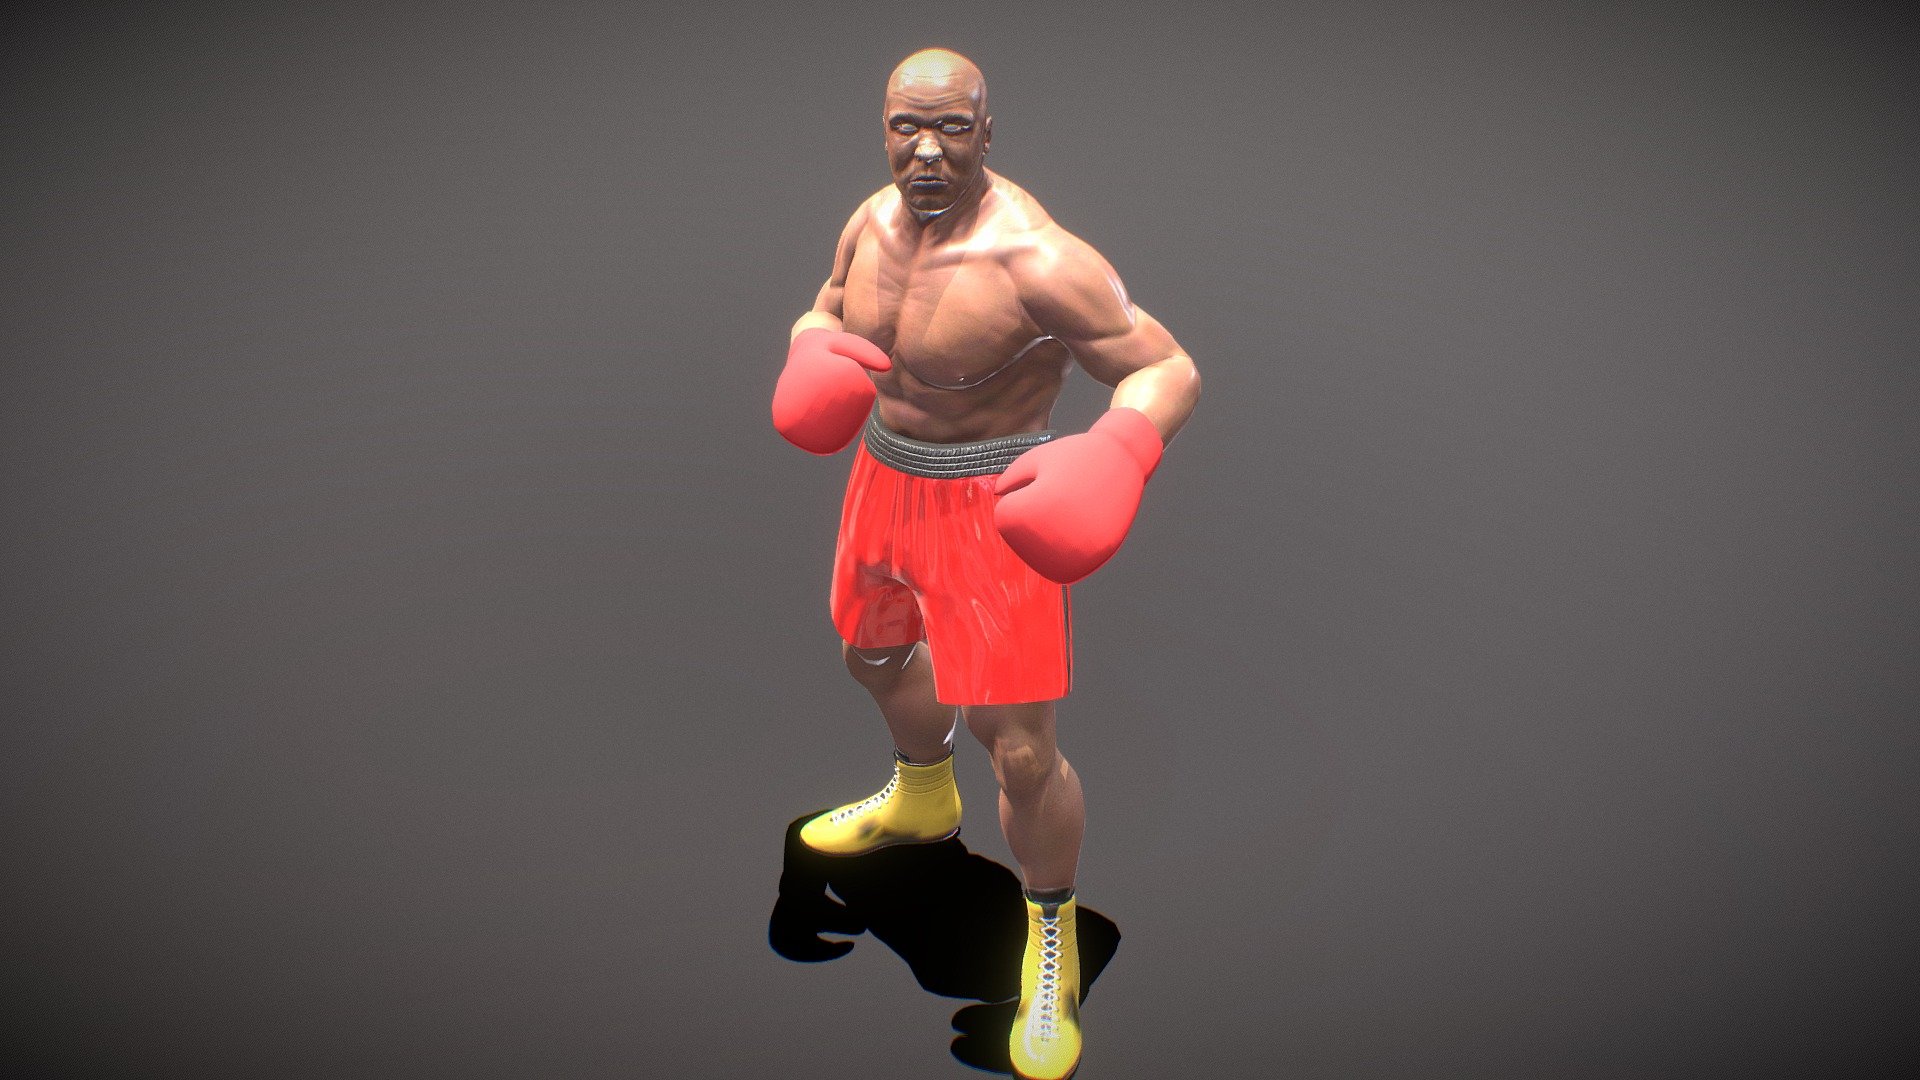 Professional Boxer with Animations to Boxing Game

Get this Boxing Game in  Unreal Marketplace
Search by &ldquo;Boxing Game